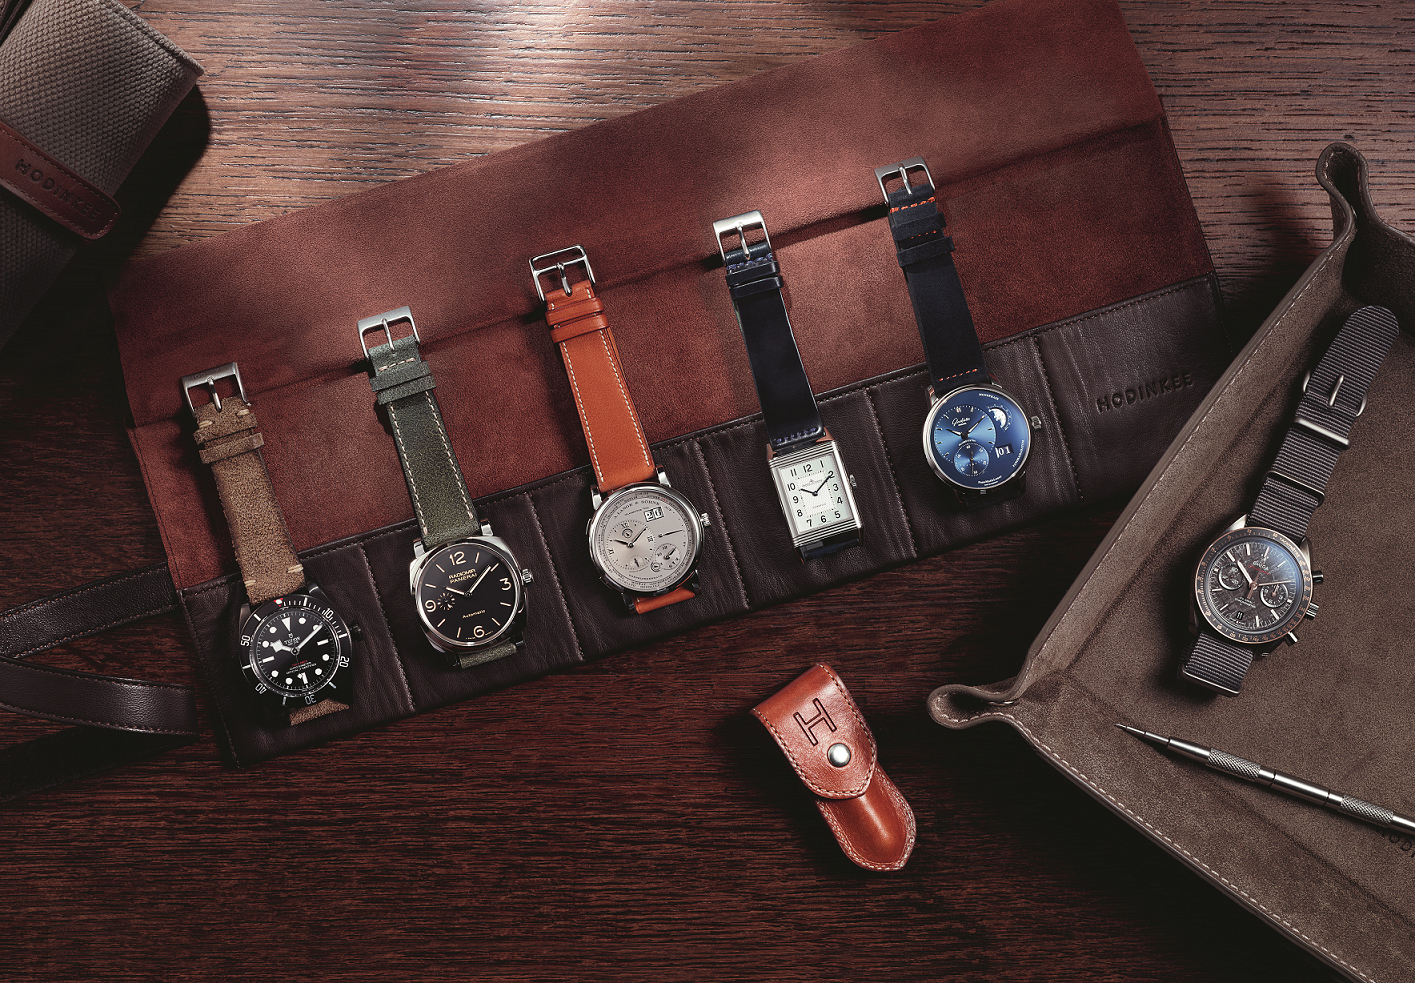 Hodinkee straps and watches